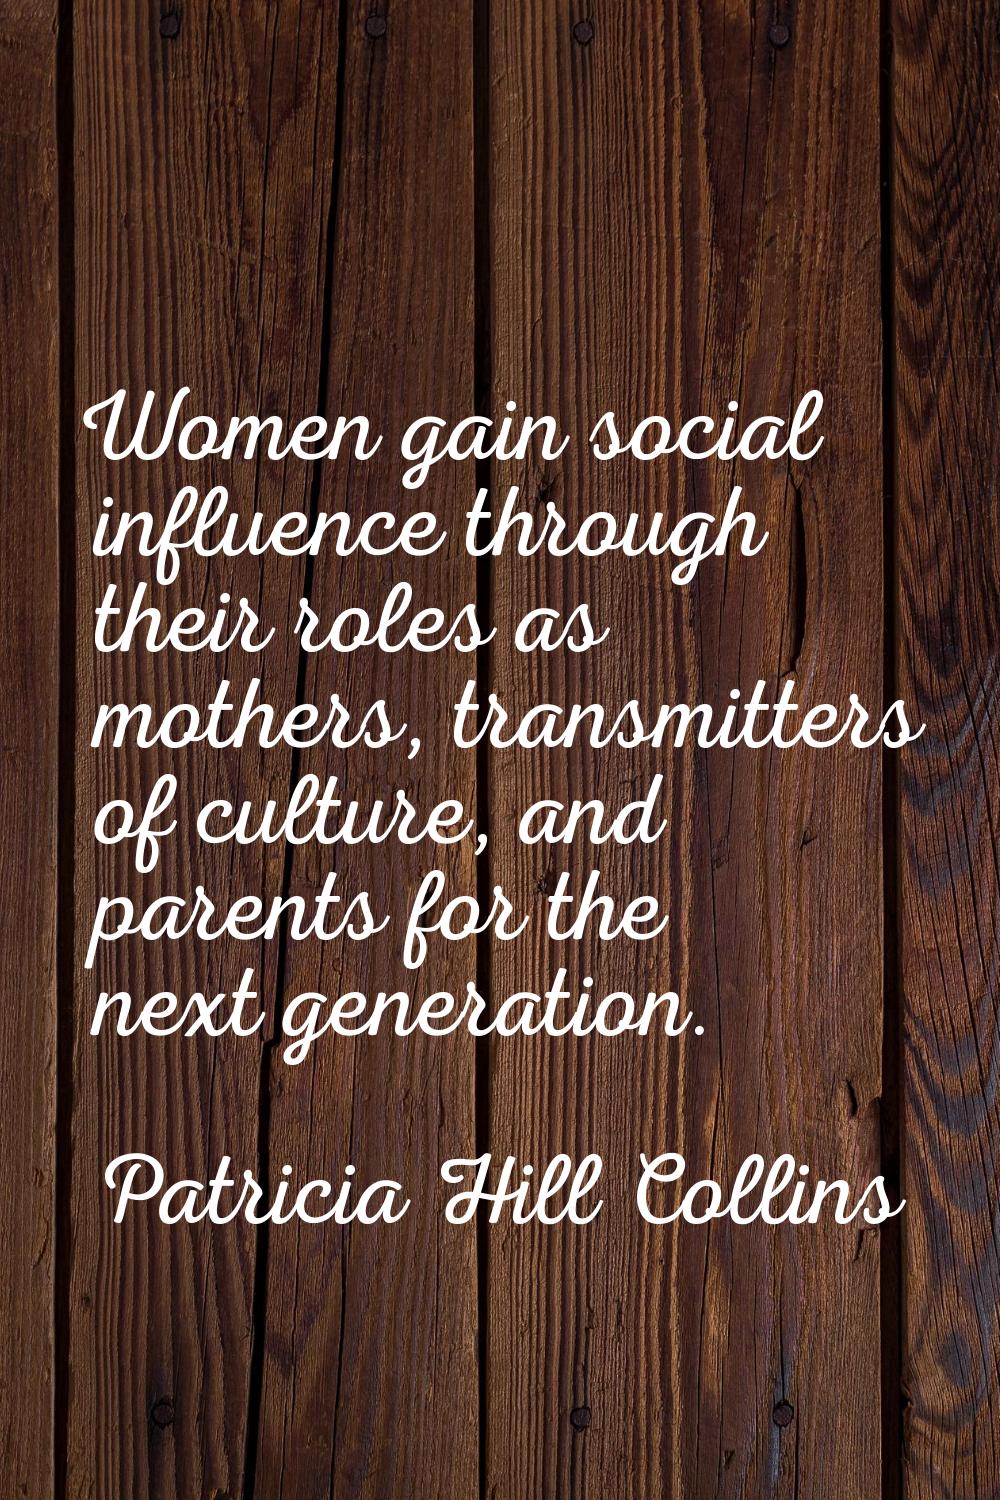 Women gain social influence through their roles as mothers, transmitters of culture, and parents fo